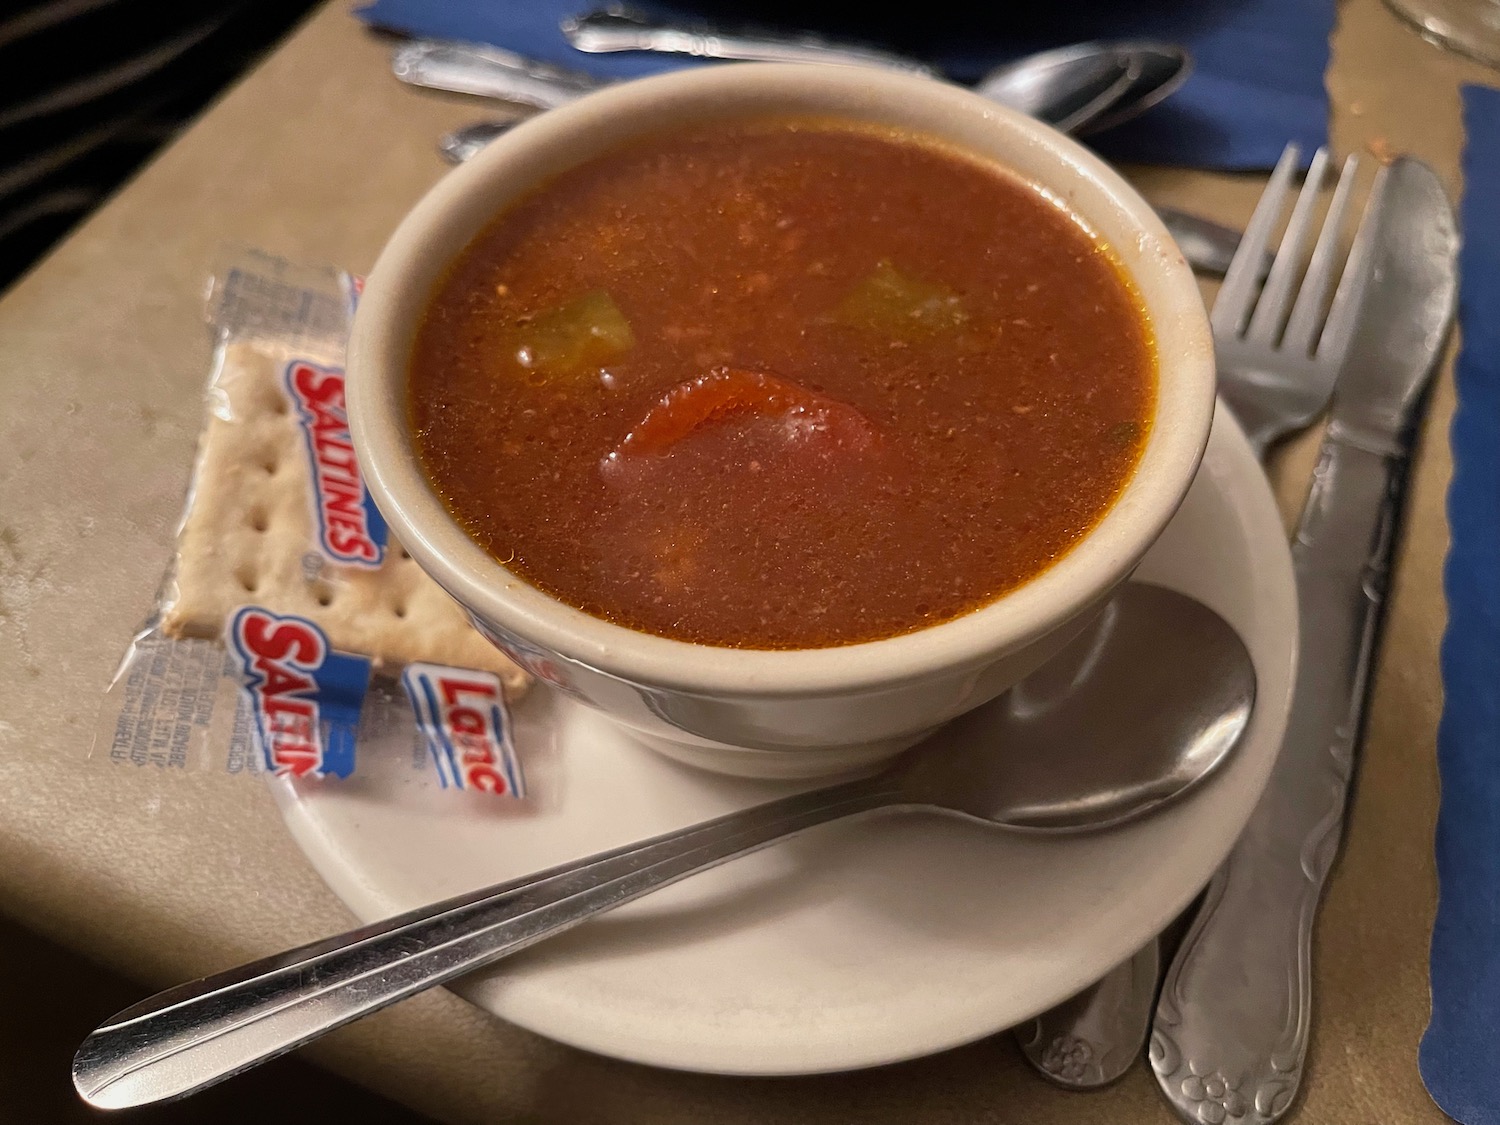 a bowl of soup on a plate with spoon and crackers